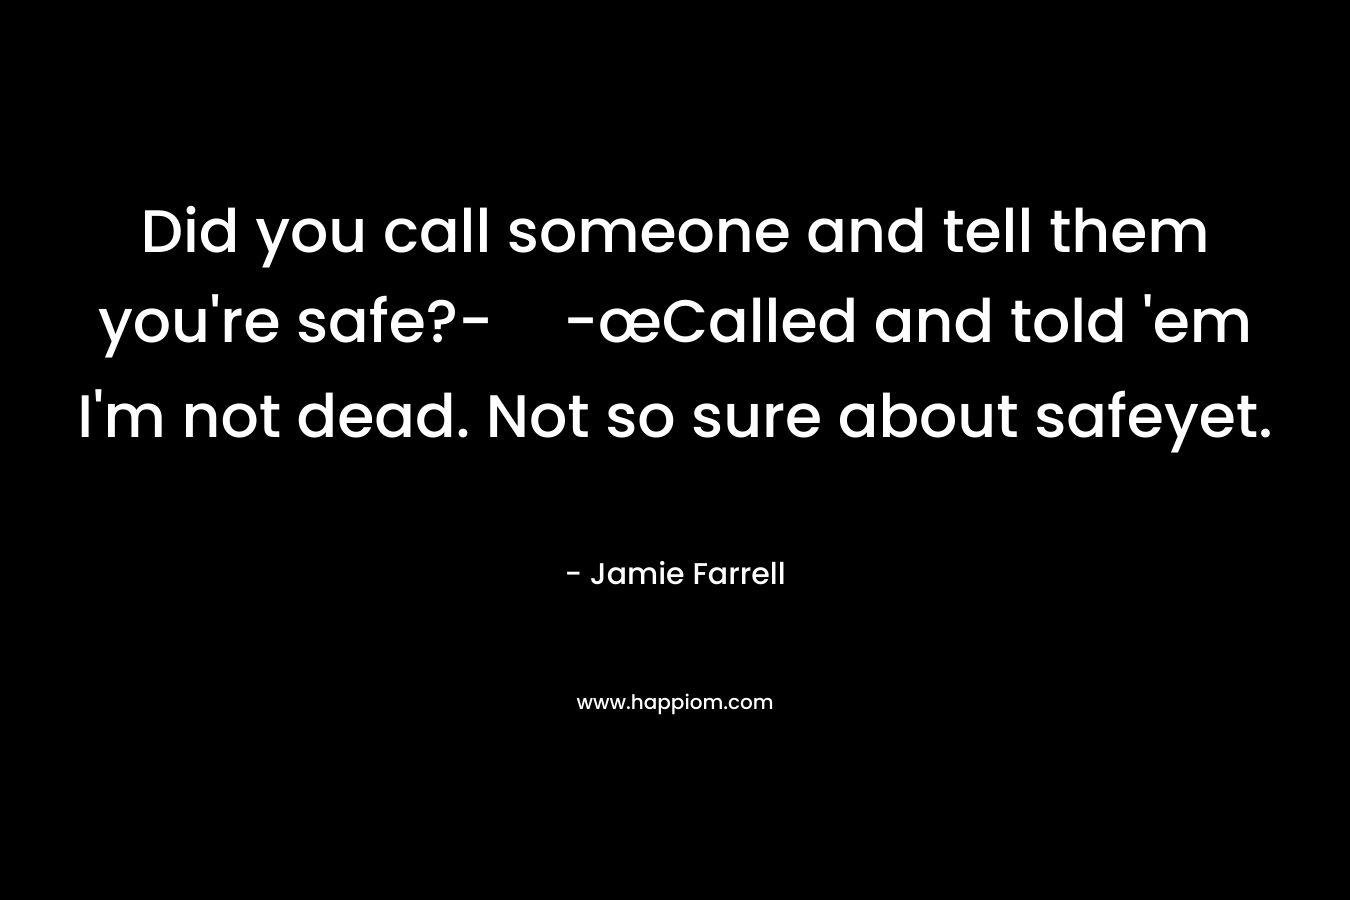 Did you call someone and tell them you’re safe?--œCalled and told ’em I’m not dead. Not so sure about safeyet. – Jamie Farrell